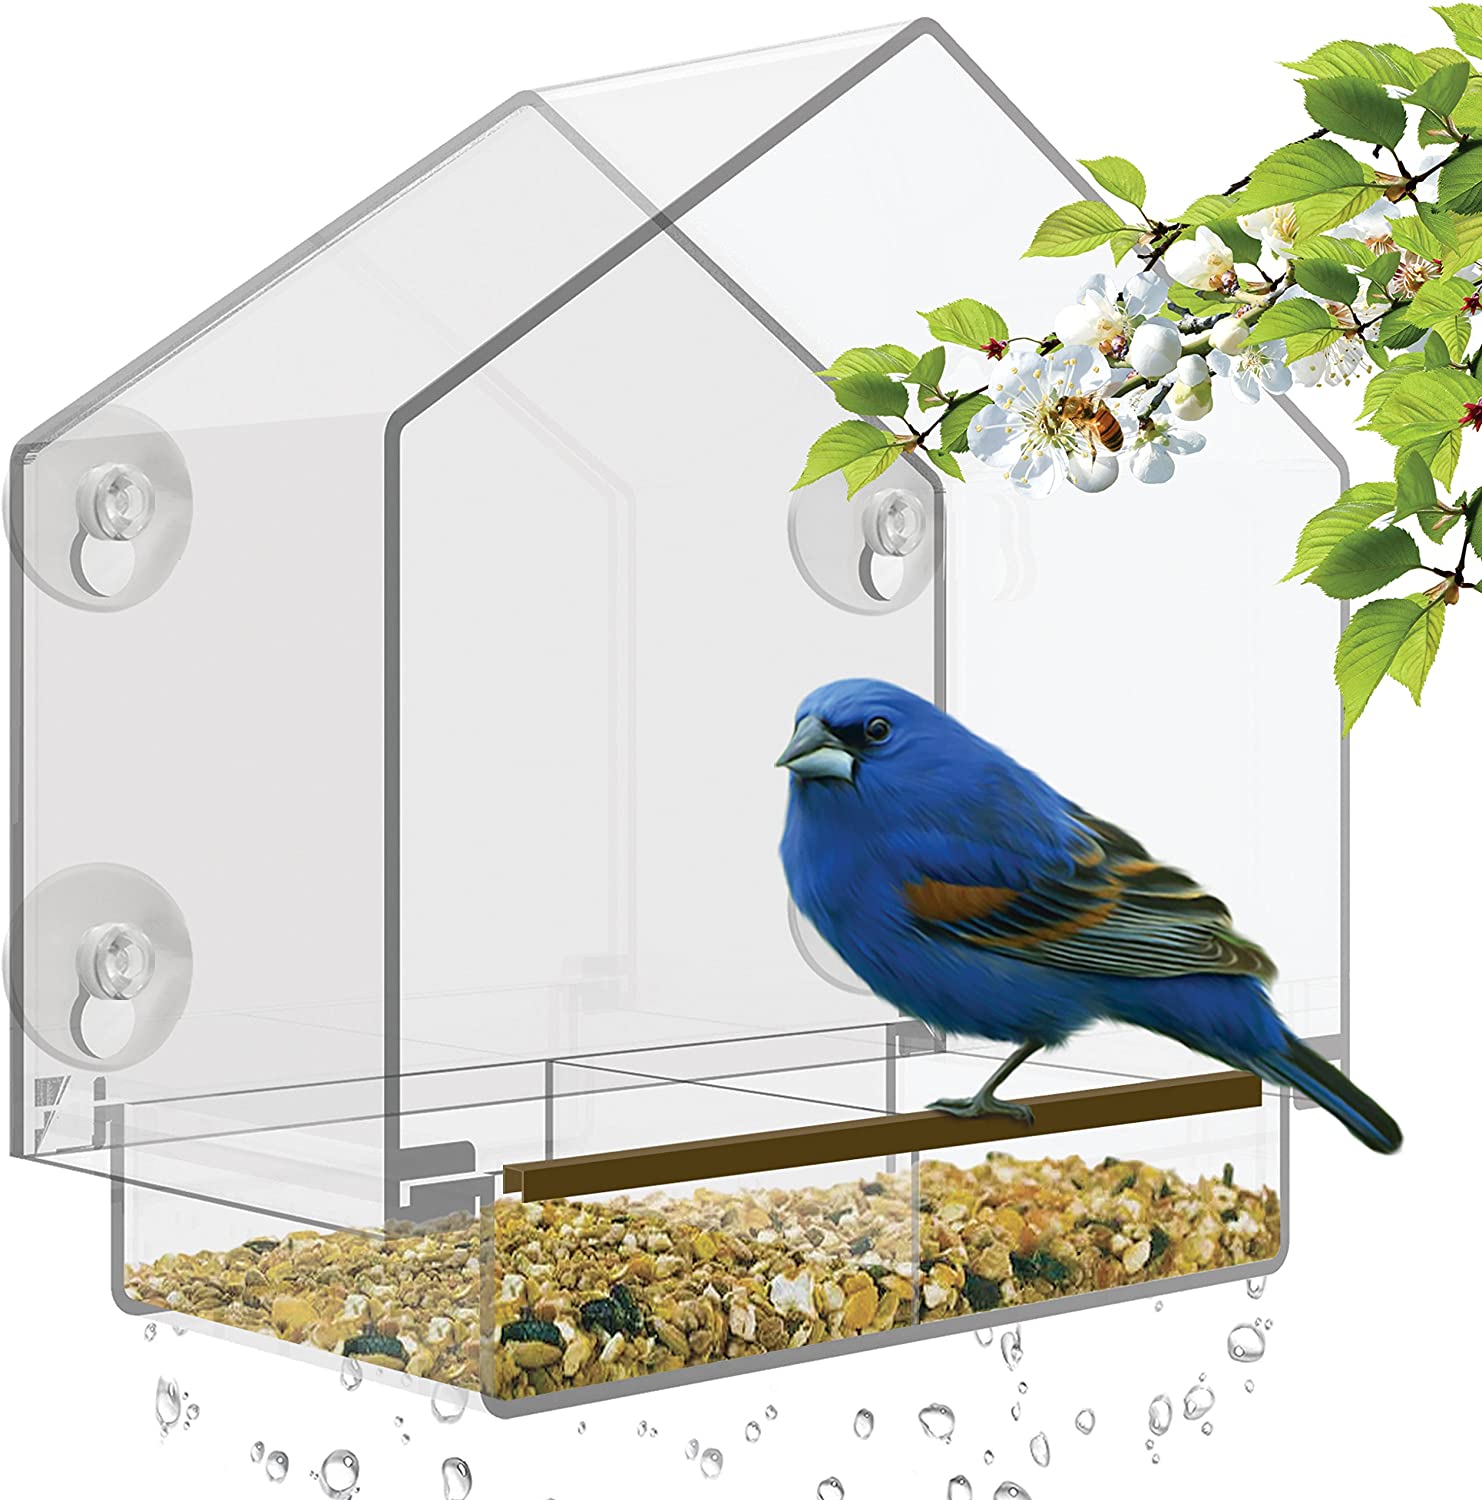 Window Bird Feeder Large Bird House for Outside Removable Sliding Tray with Drain Holes. Best for Wild Birds Clear Acrylic